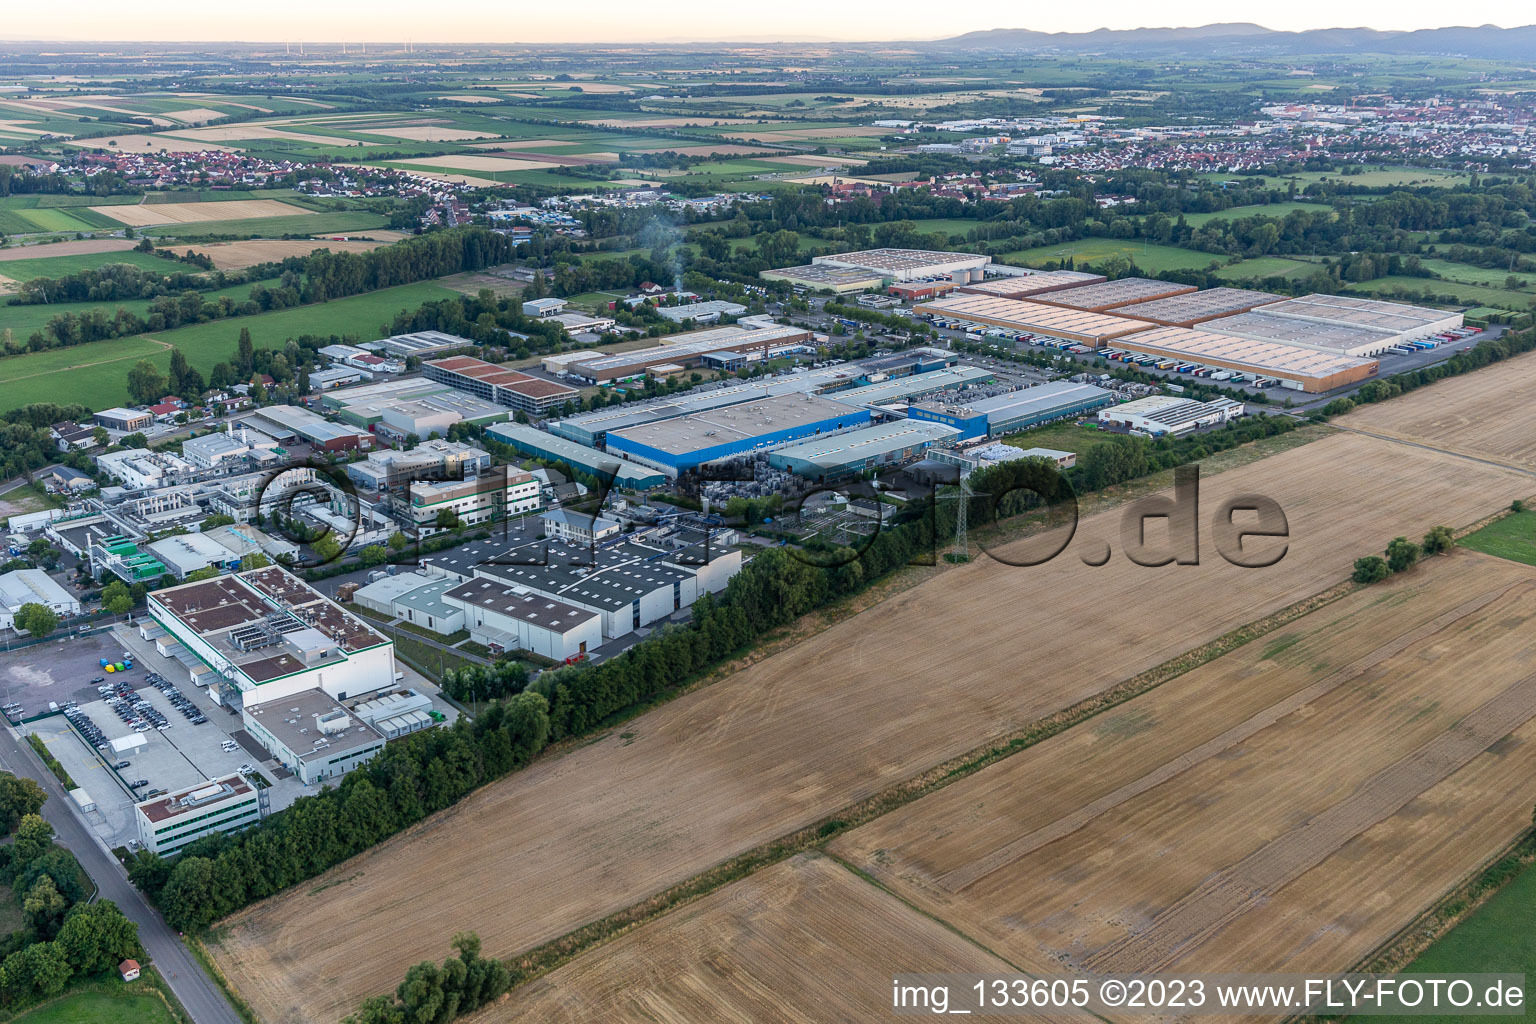 Landau in der Pfalz in the state Rhineland-Palatinate, Germany seen from a drone